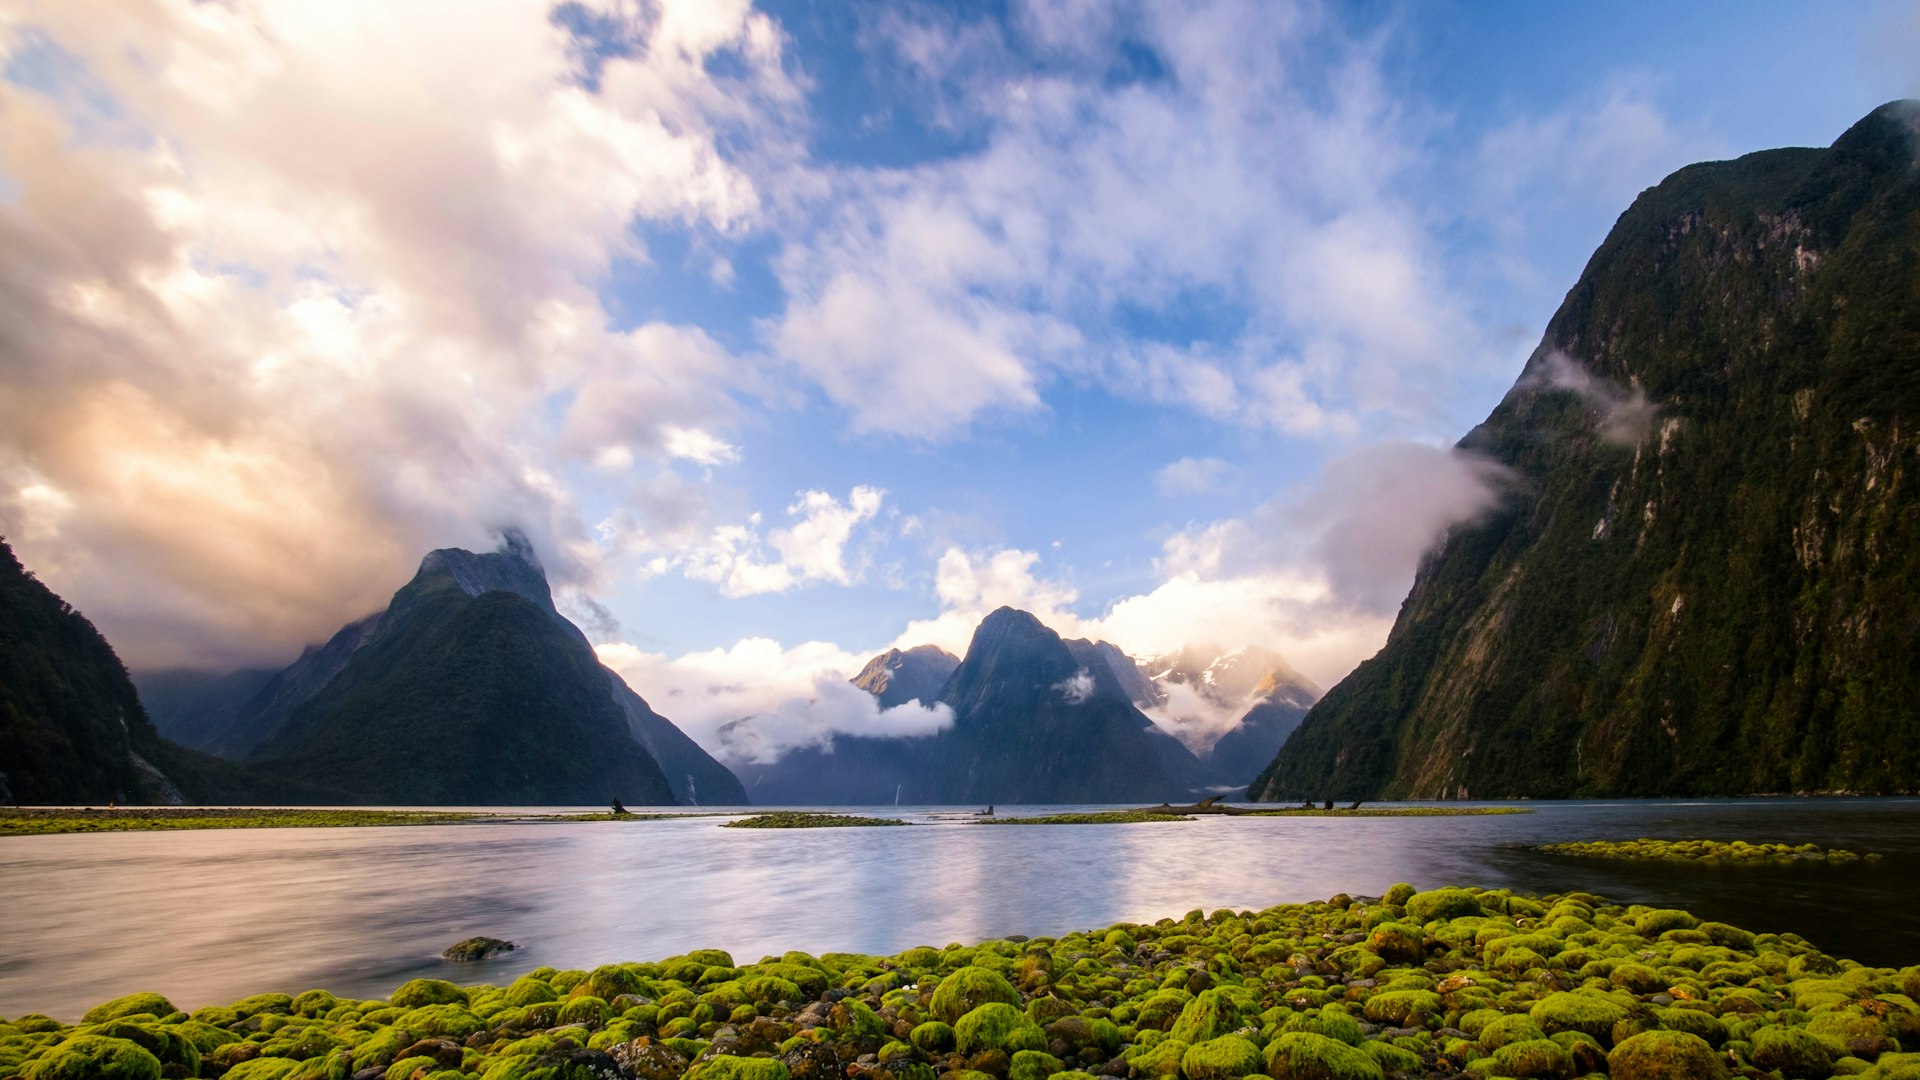 Dense clouds hang over green-topped mountains as the large Milford Sound is surrounded by greenery